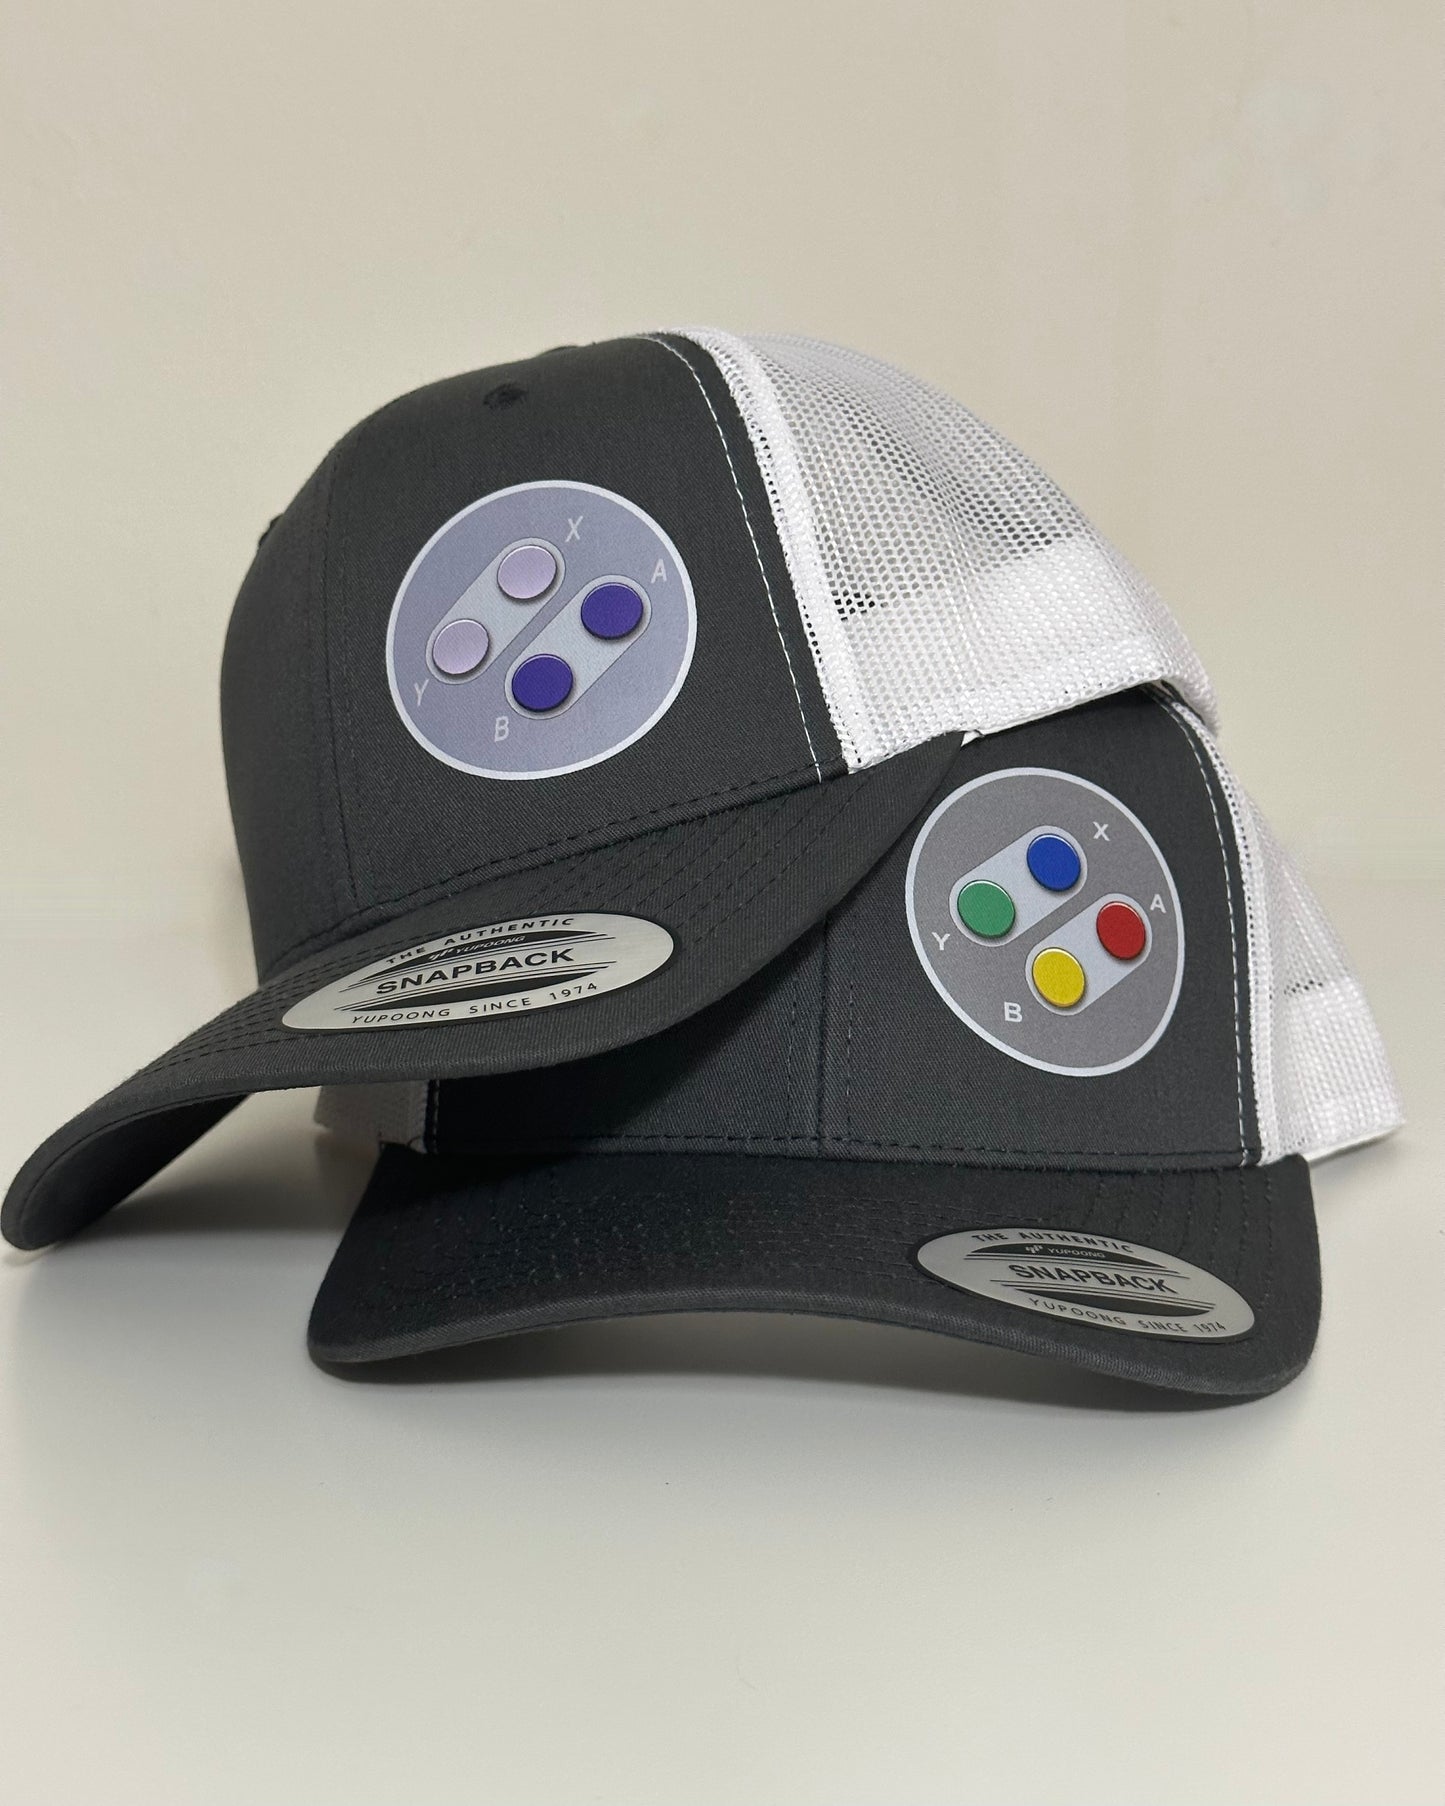 SNES or SFC Gaming Trucker Hat